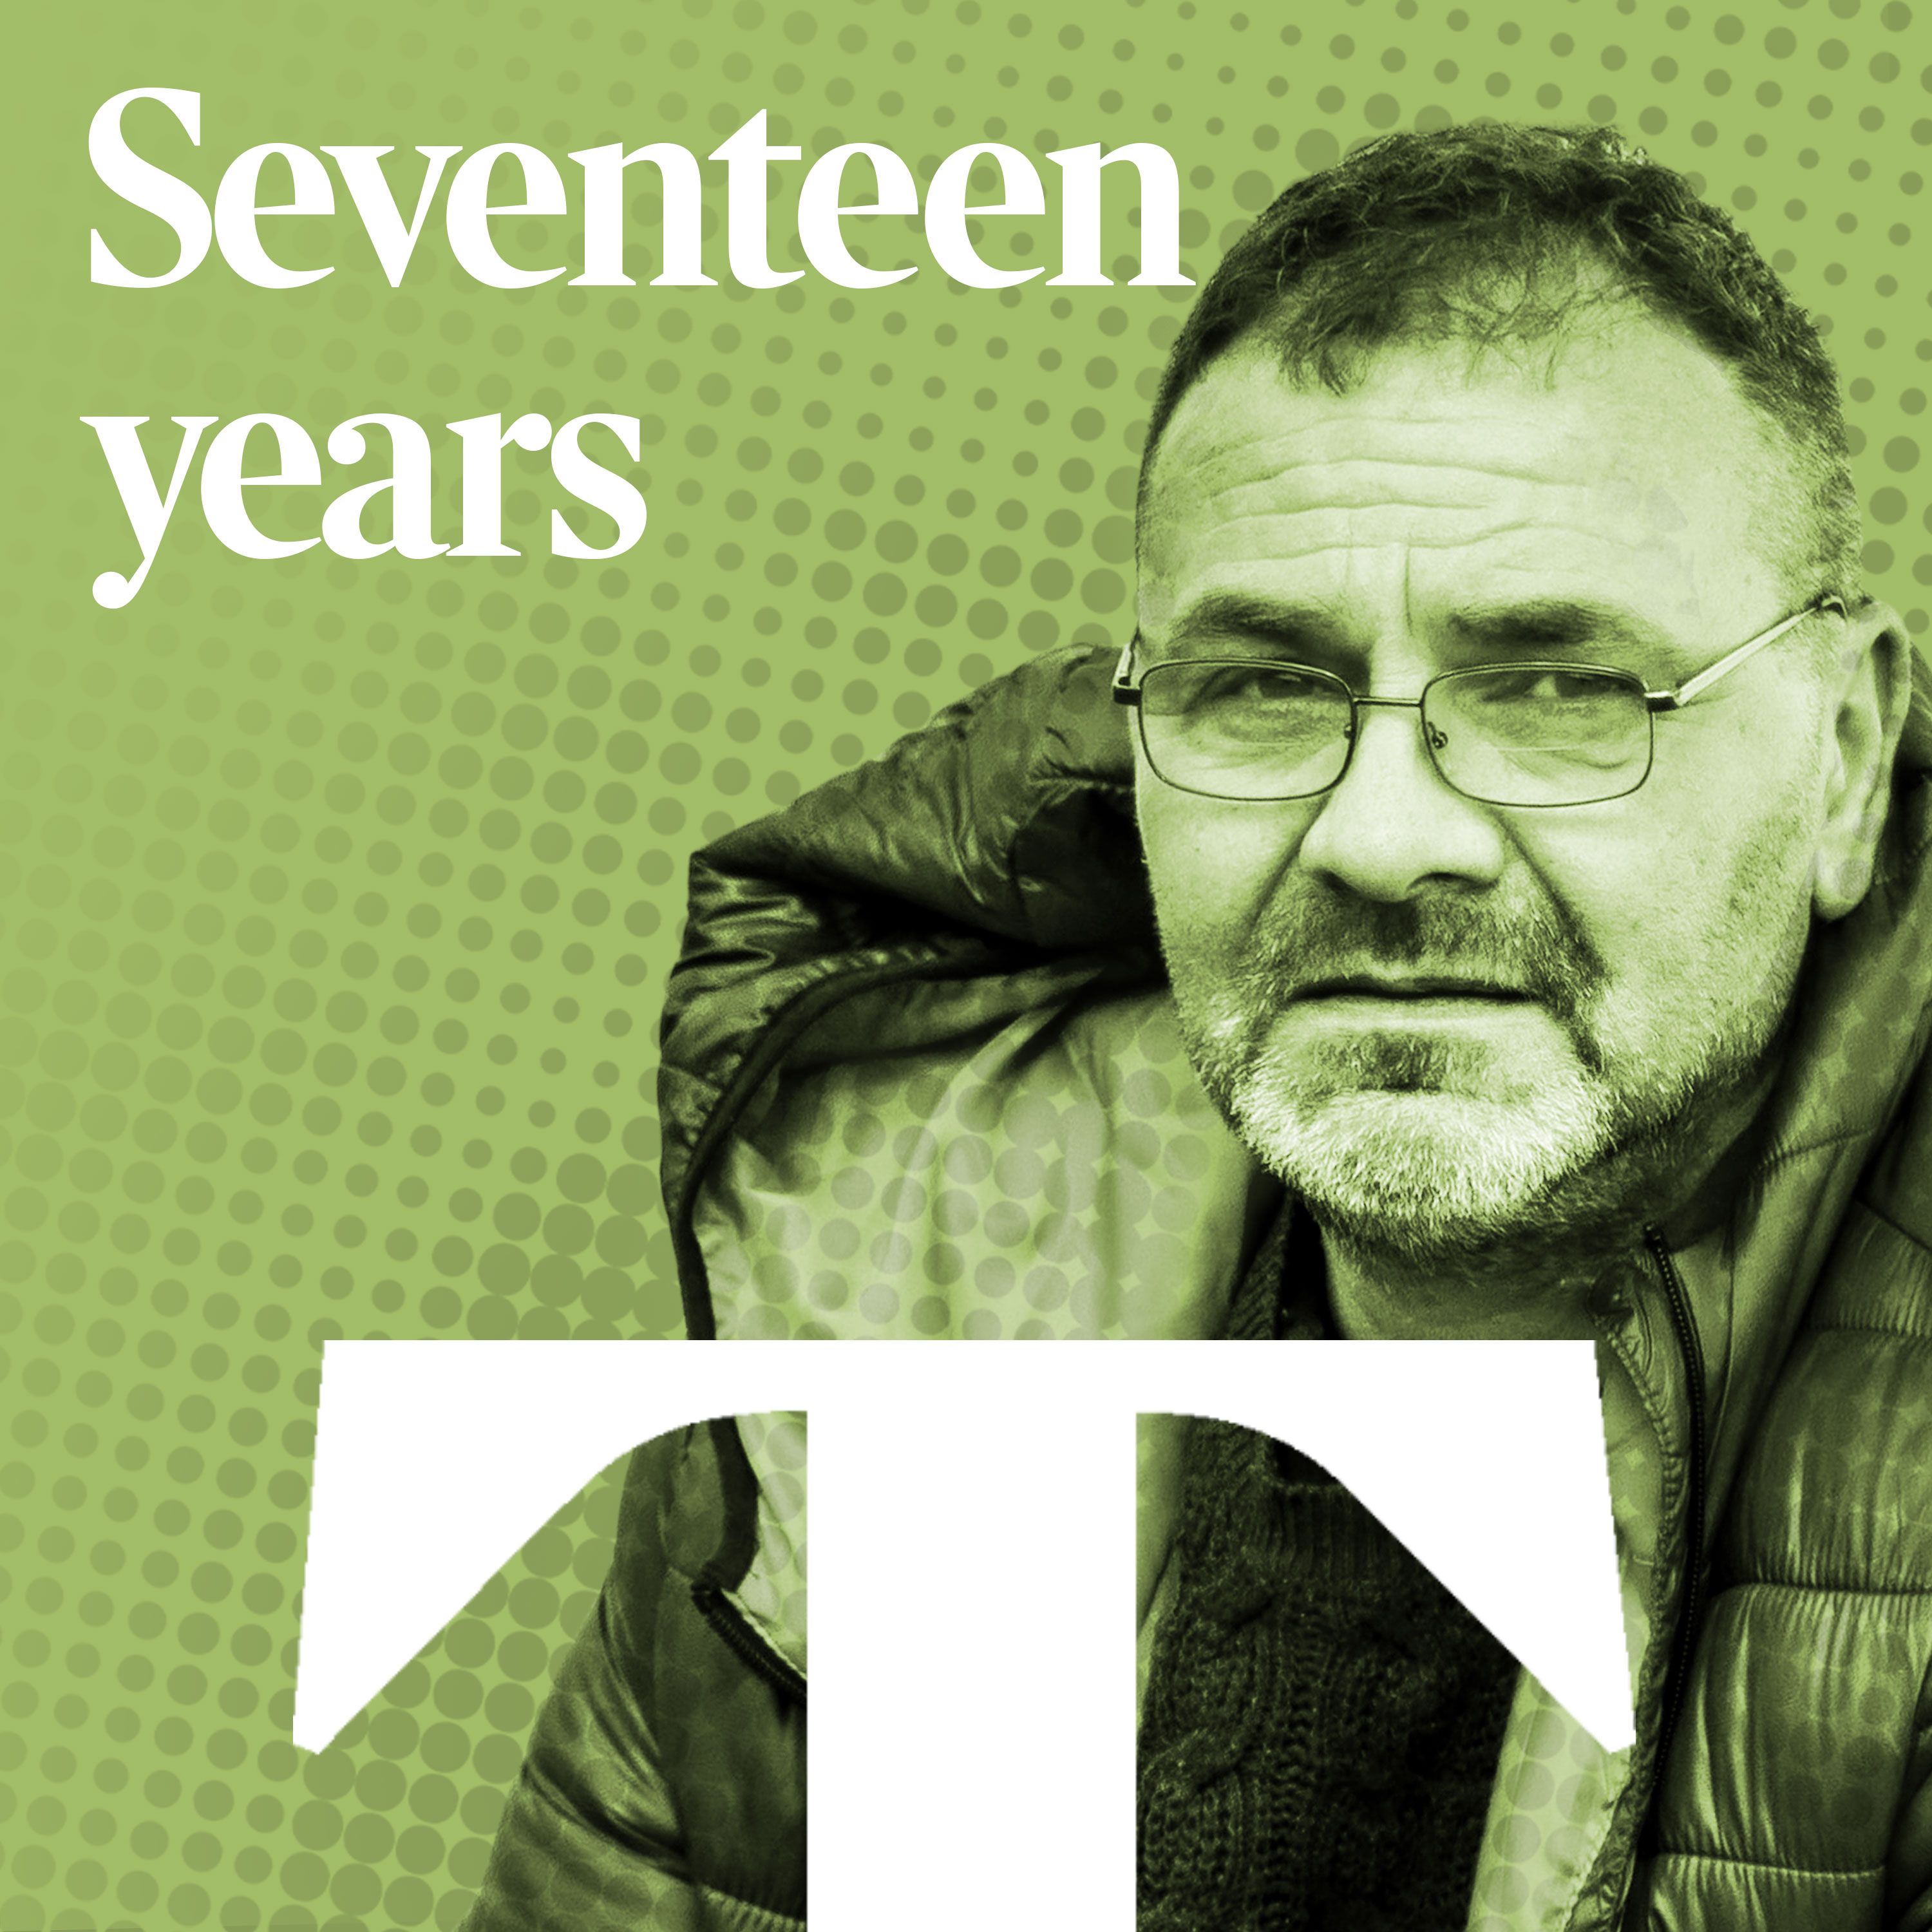 Seventeen years: The Andrew Malkinson story (Pt 1) - Life turned upside down